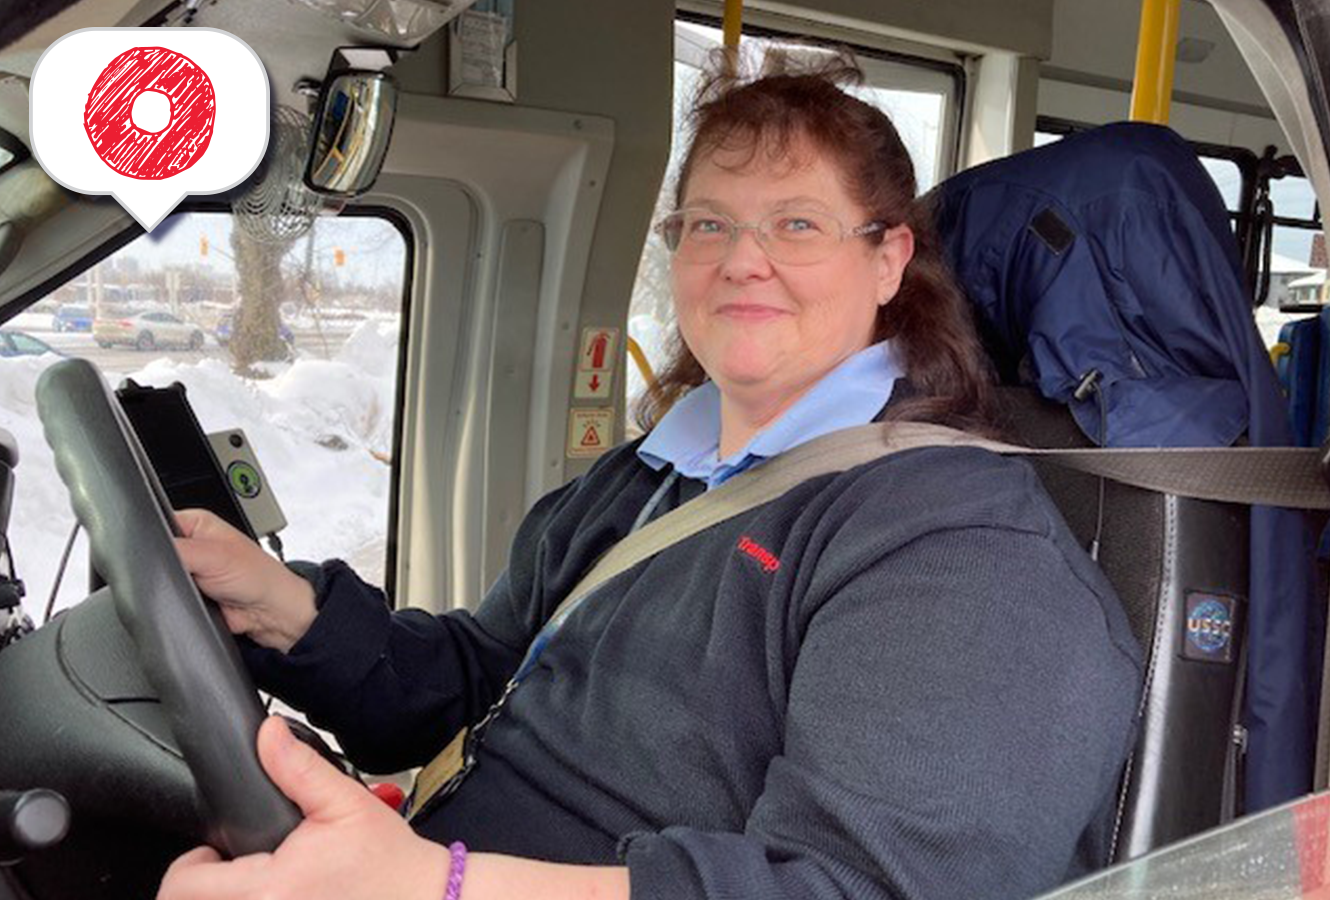 Image - A day in the life: Para Transpo Operator